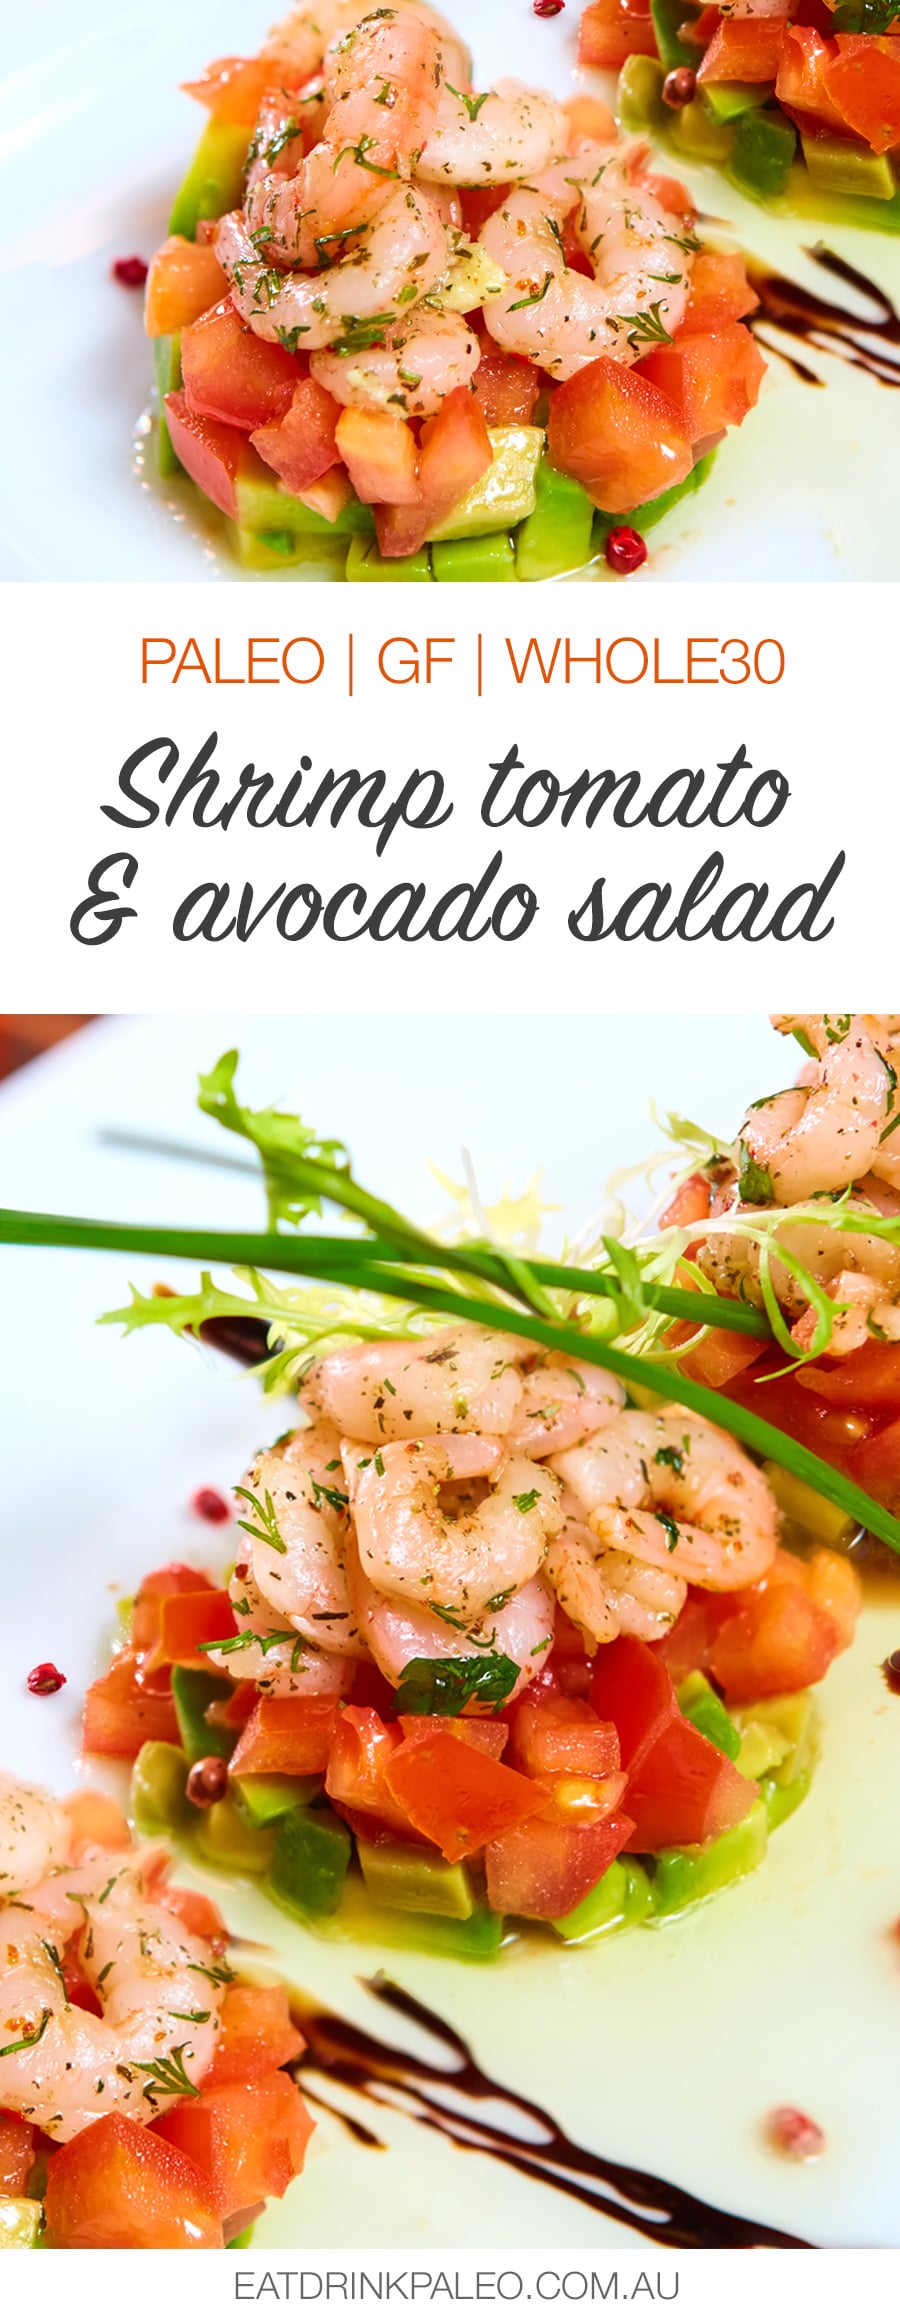 Festive Shrimp Avocado & Tomato Salad Stacks (photo by Andriy Sarymsakov) - perfect as a Christmas or dinner party appetizer or starter, this dish is paleo, gluten-free, low-carb, and Whole30 friendly